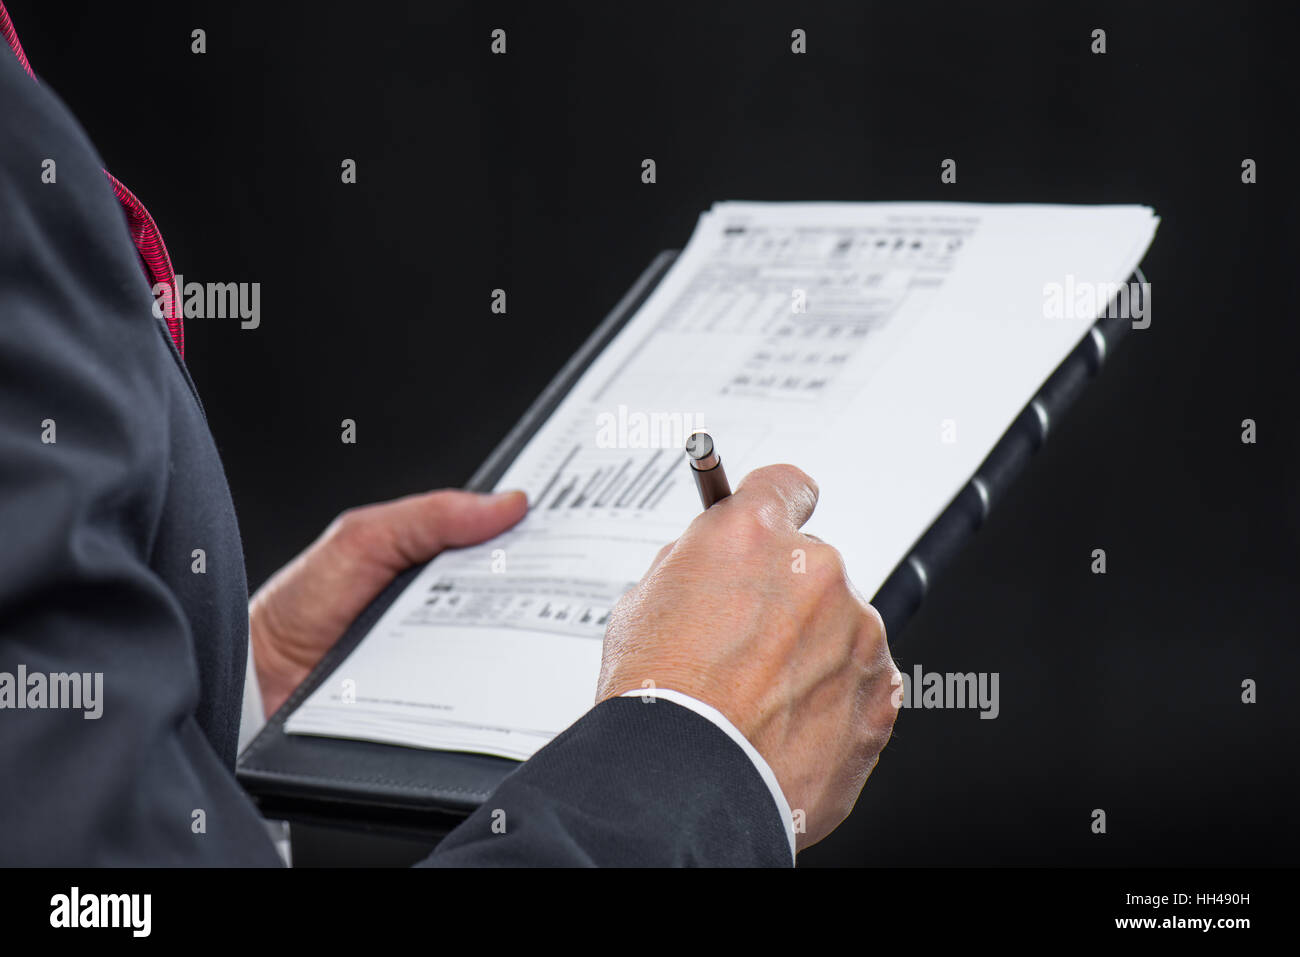 Close-up partial view of businessman holding papers and writing with pen Stock Photo